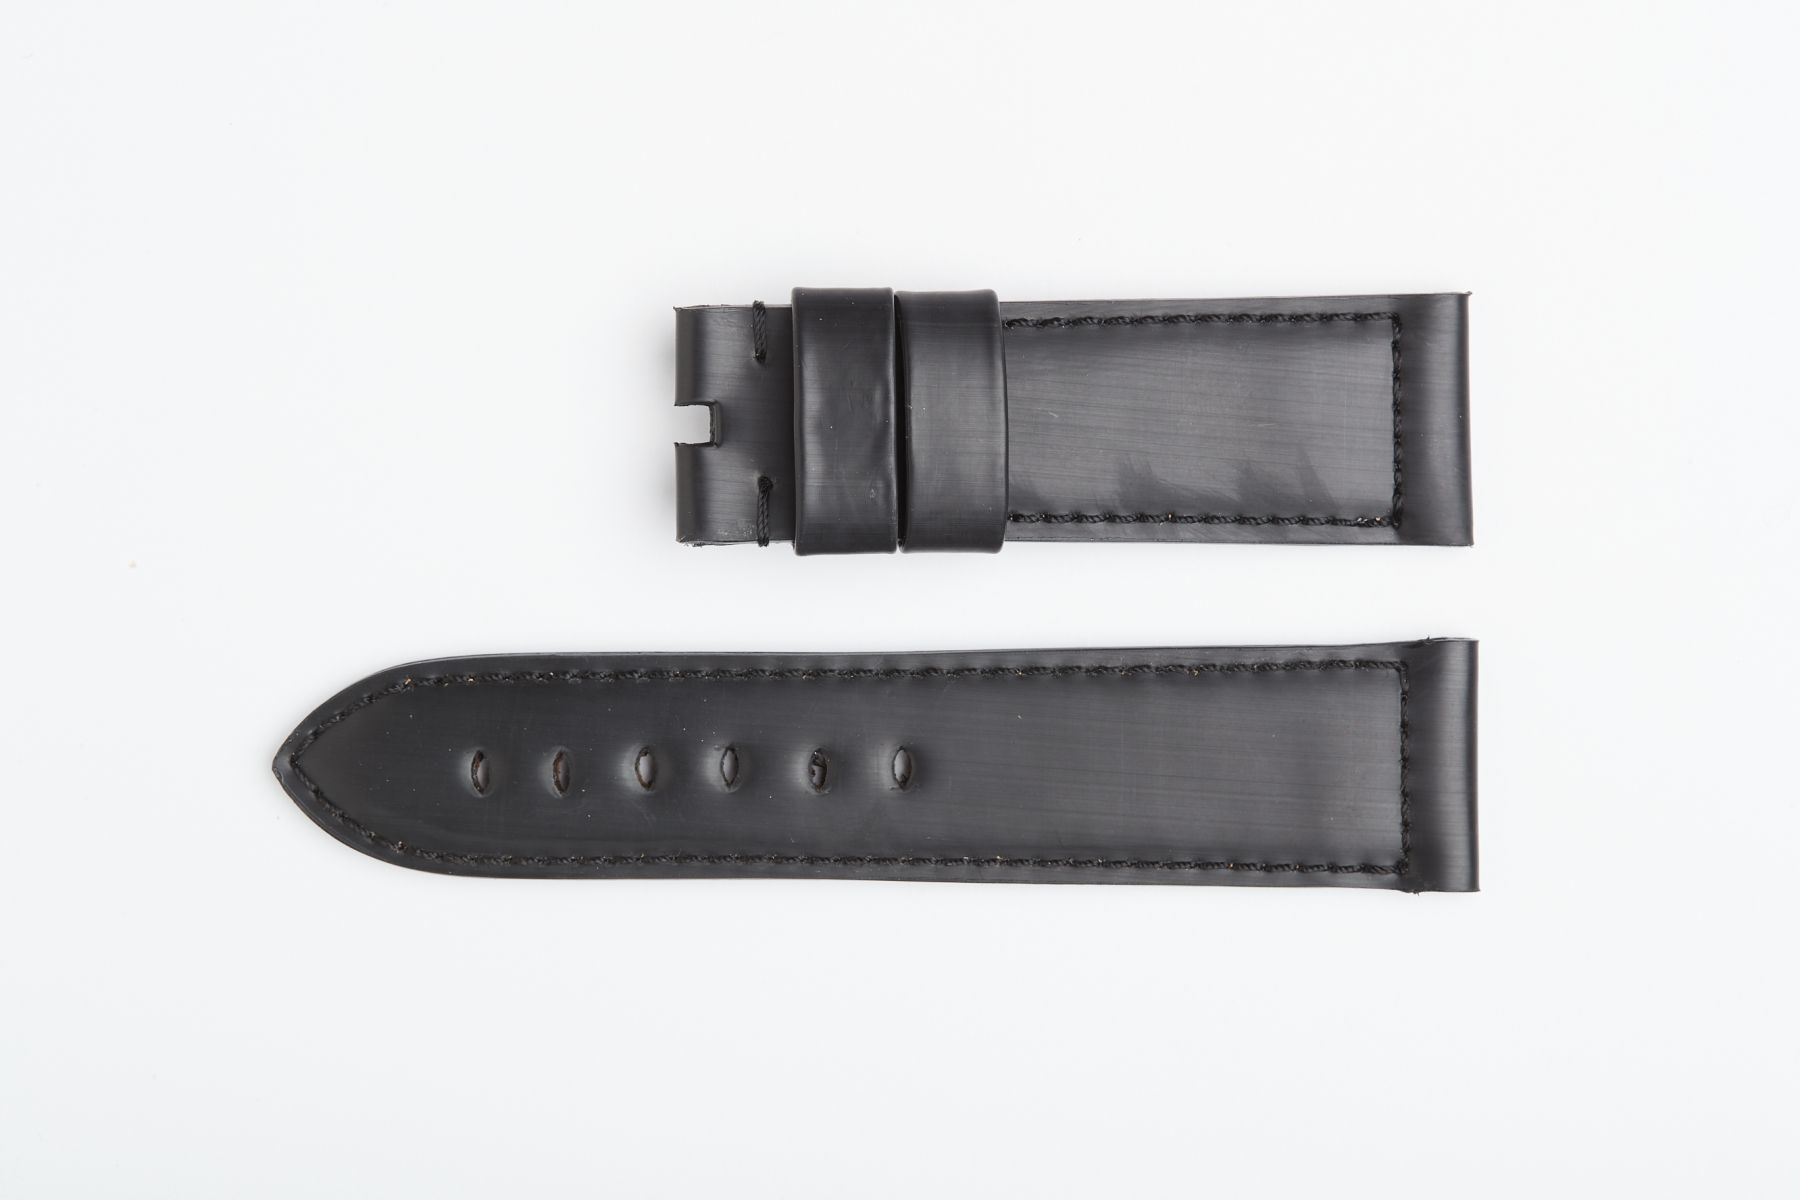 Onyx Black Recycled Rubber strap for Panerai style timepieces